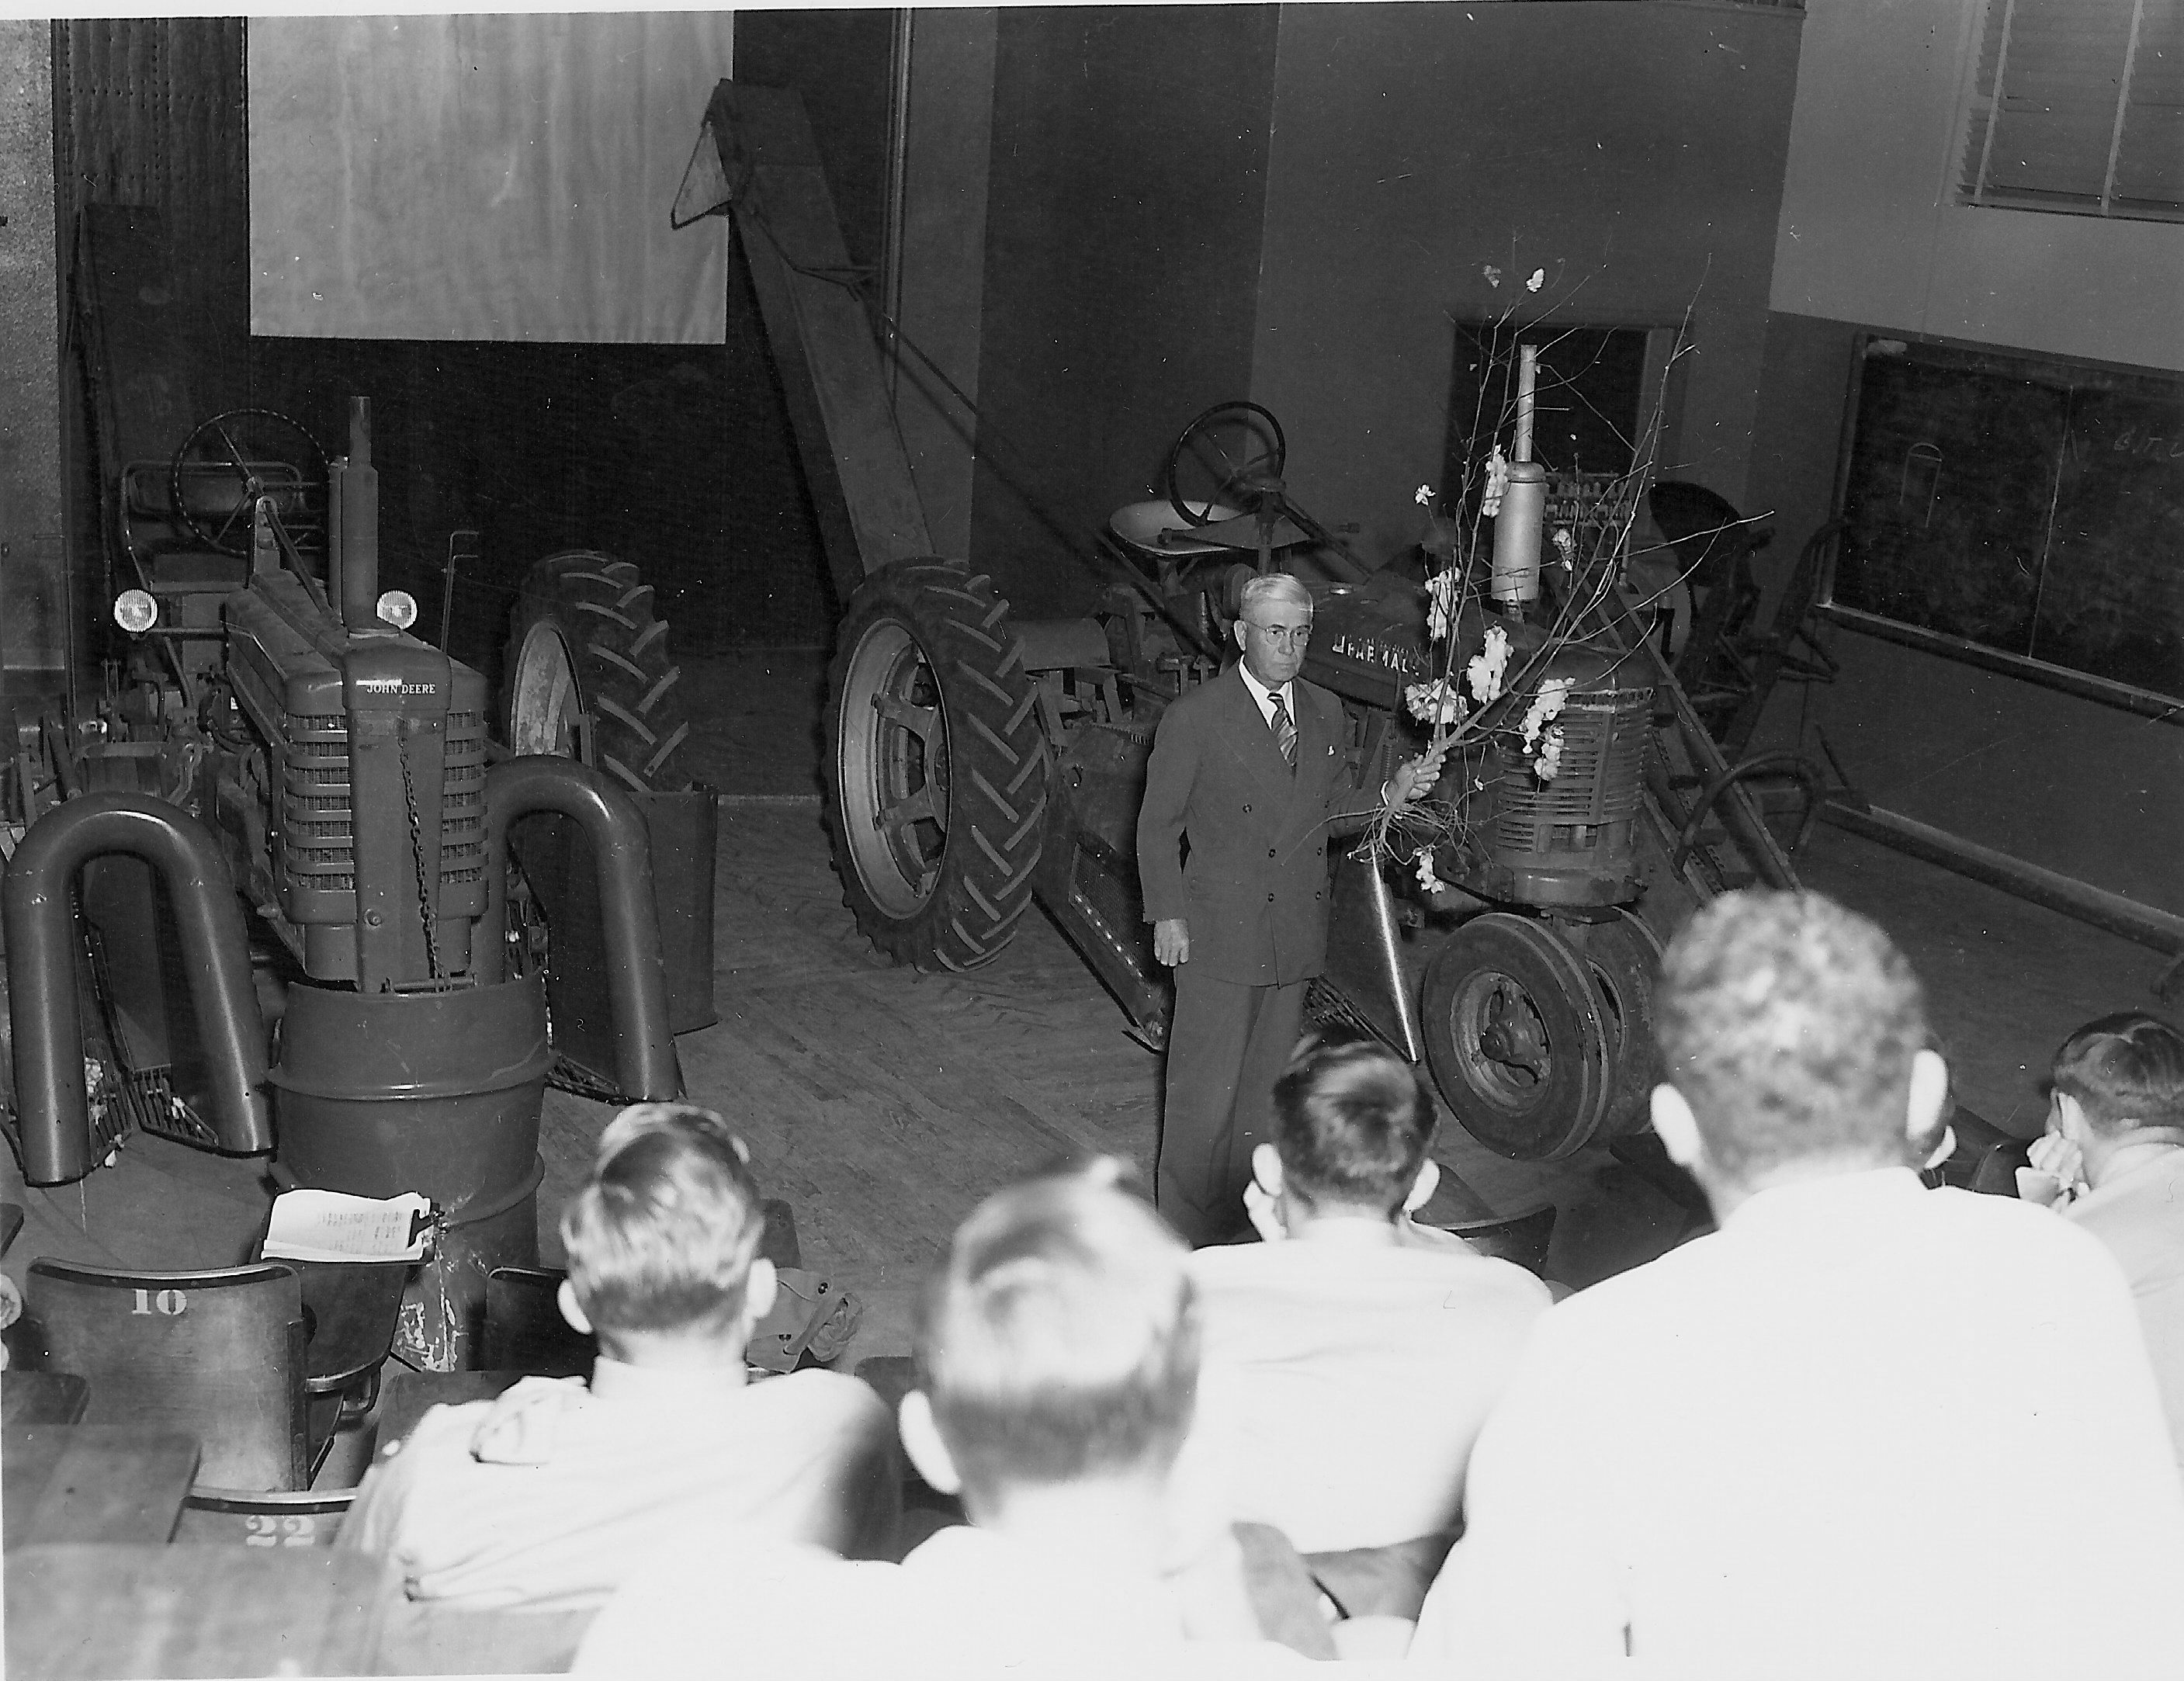 Harris P. Smith discusses cotton harvesting equipment in the lecture hall.  The tractors are on the wooden turntable that allowed rotation for better views by the students.